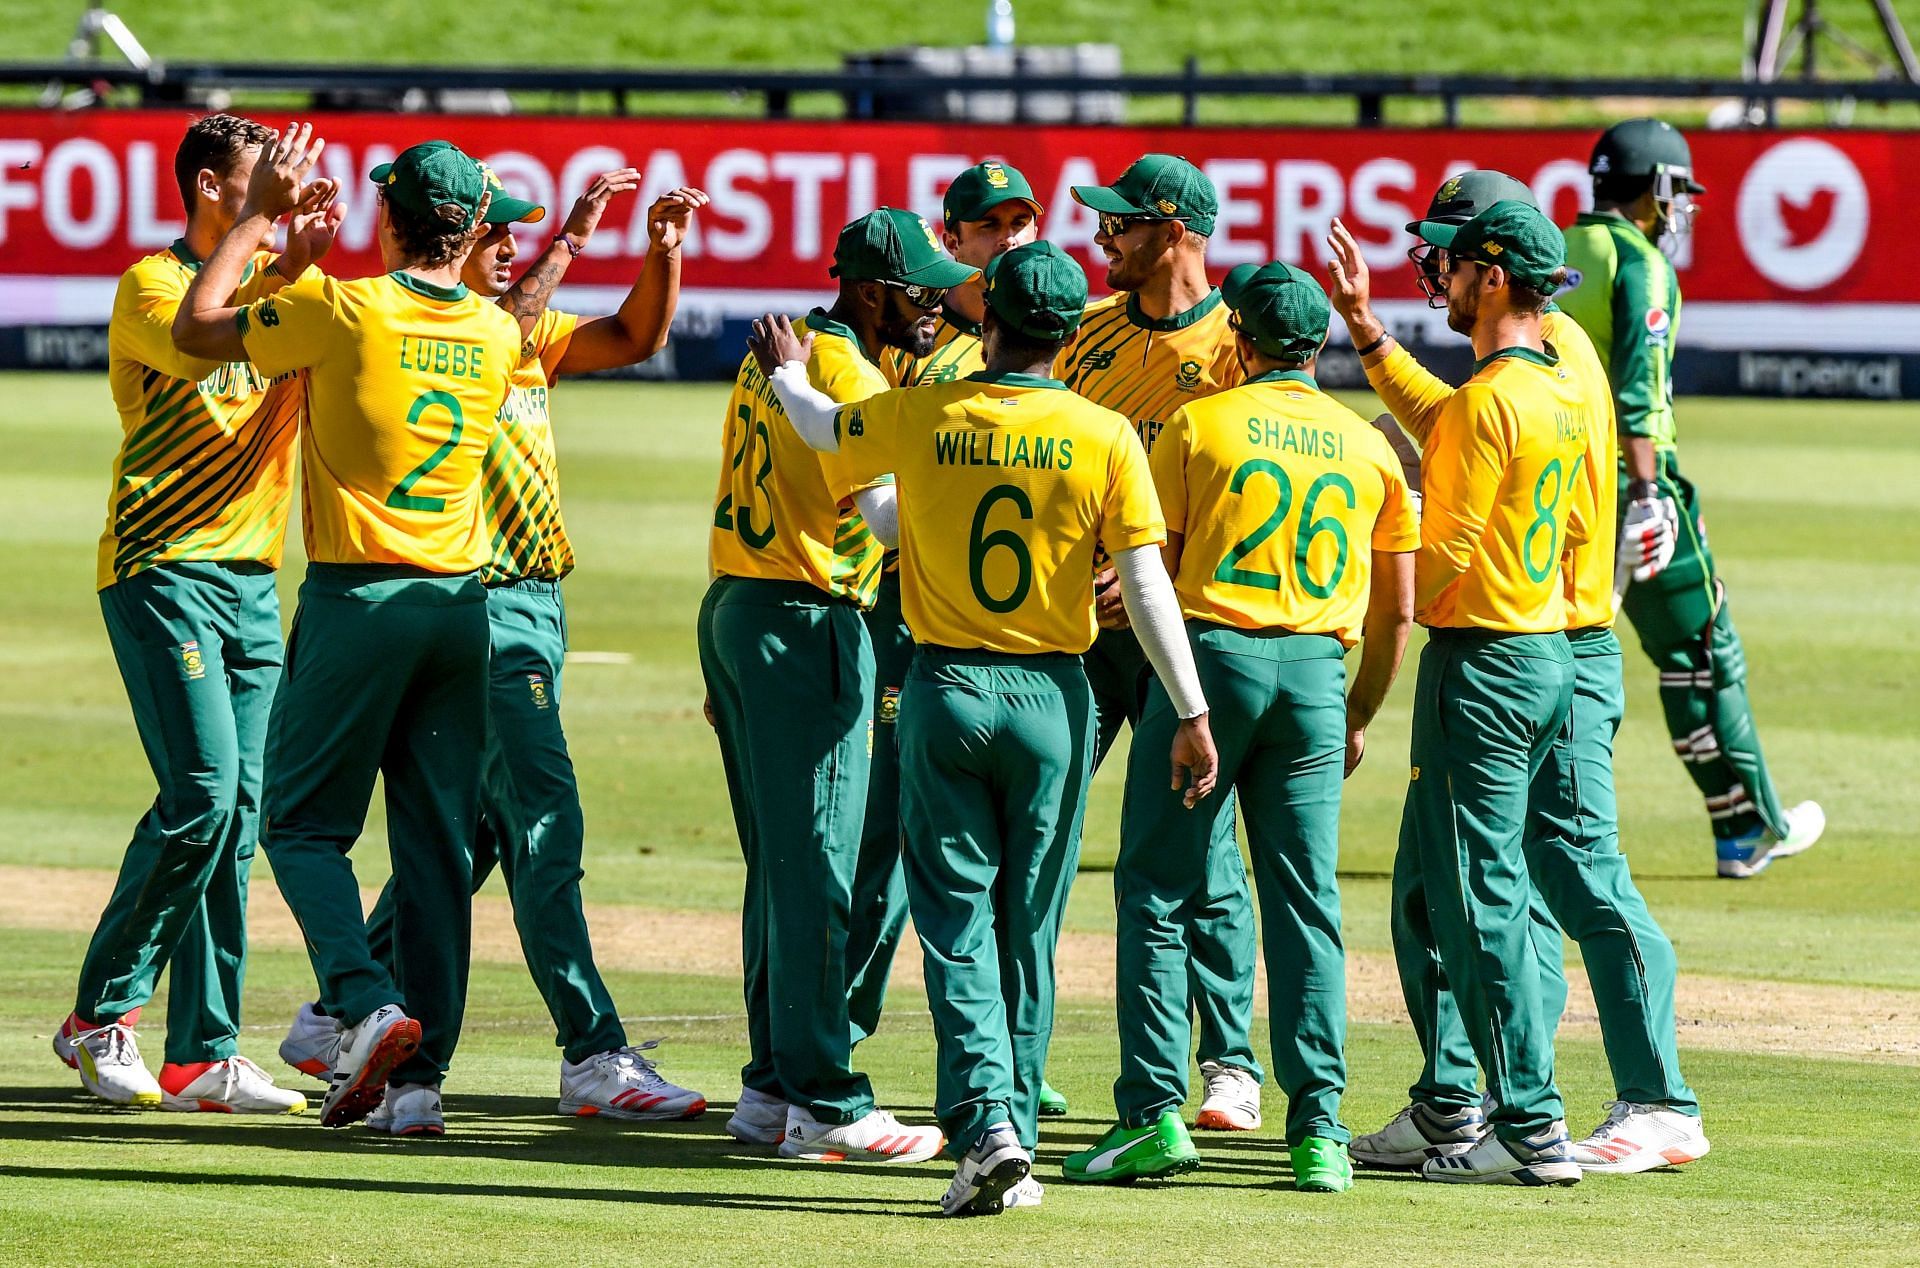 South Africa lost their first match of ICC T20 World Cup 2021 against Australia